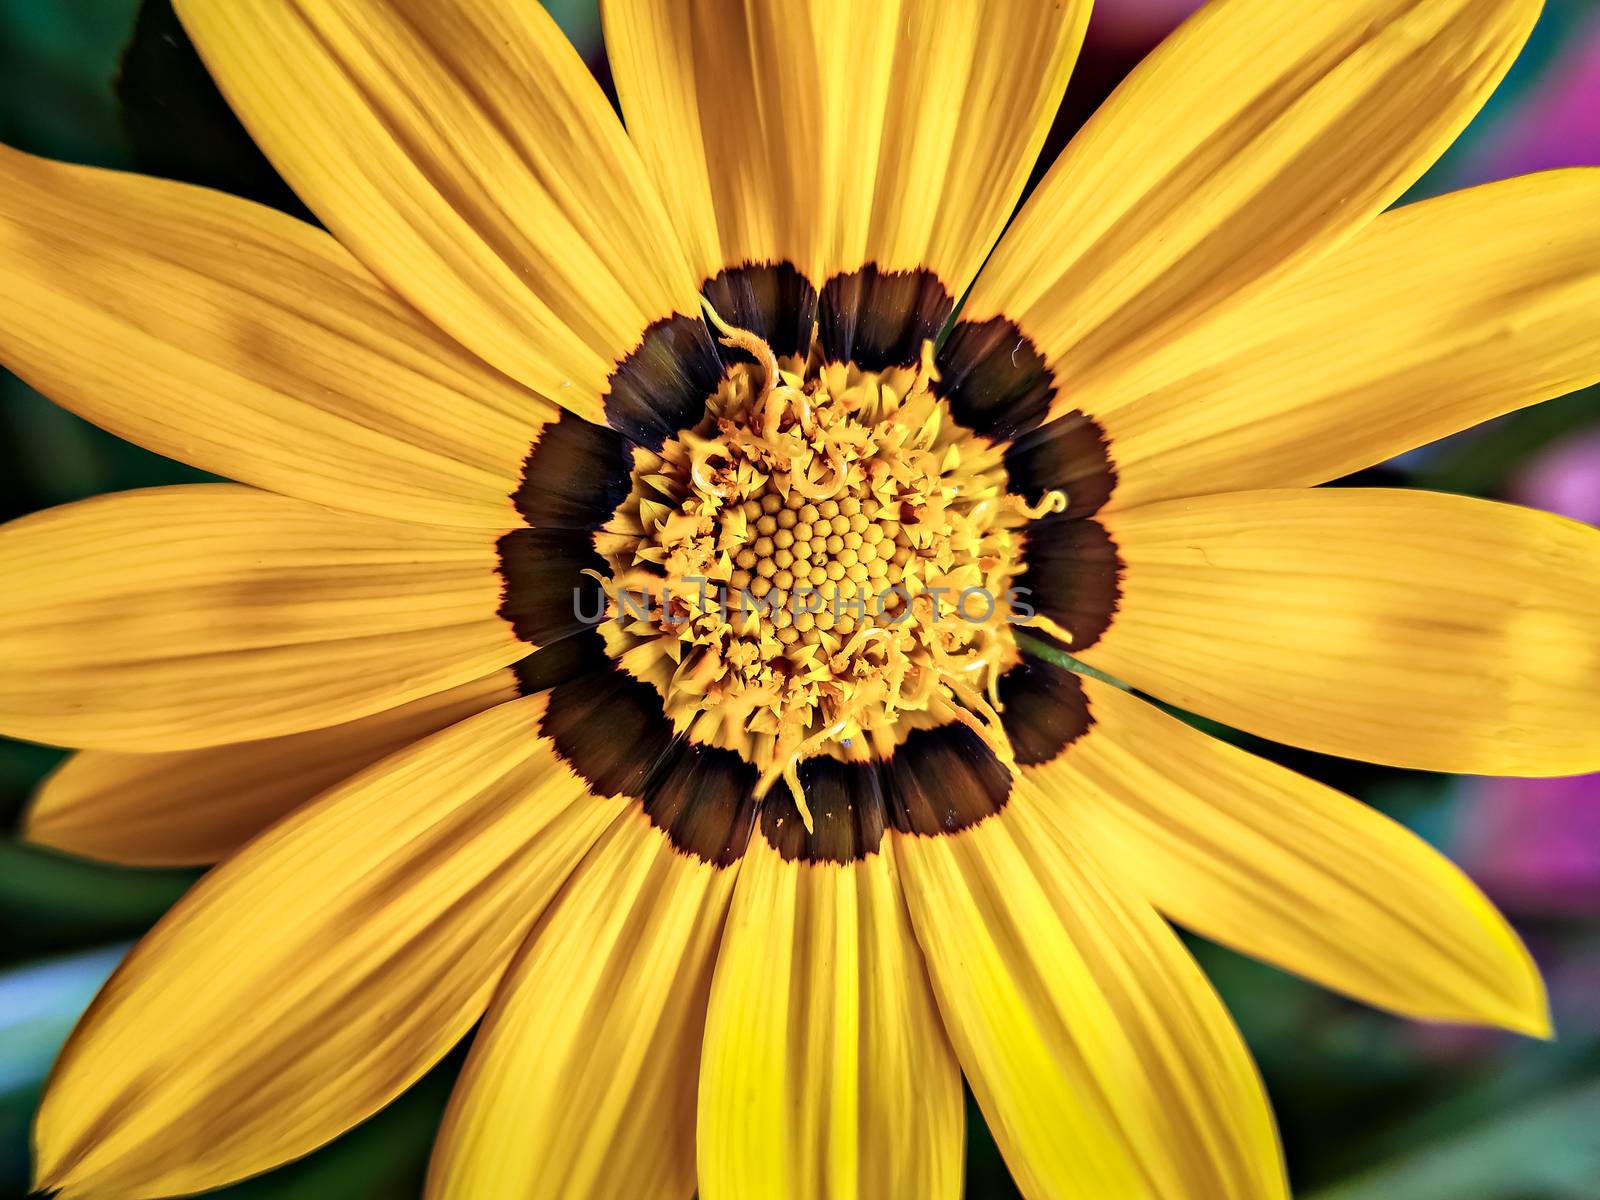 Isolated, close-up image of  yellow & brown petals  of Gazania flower with yellow center.